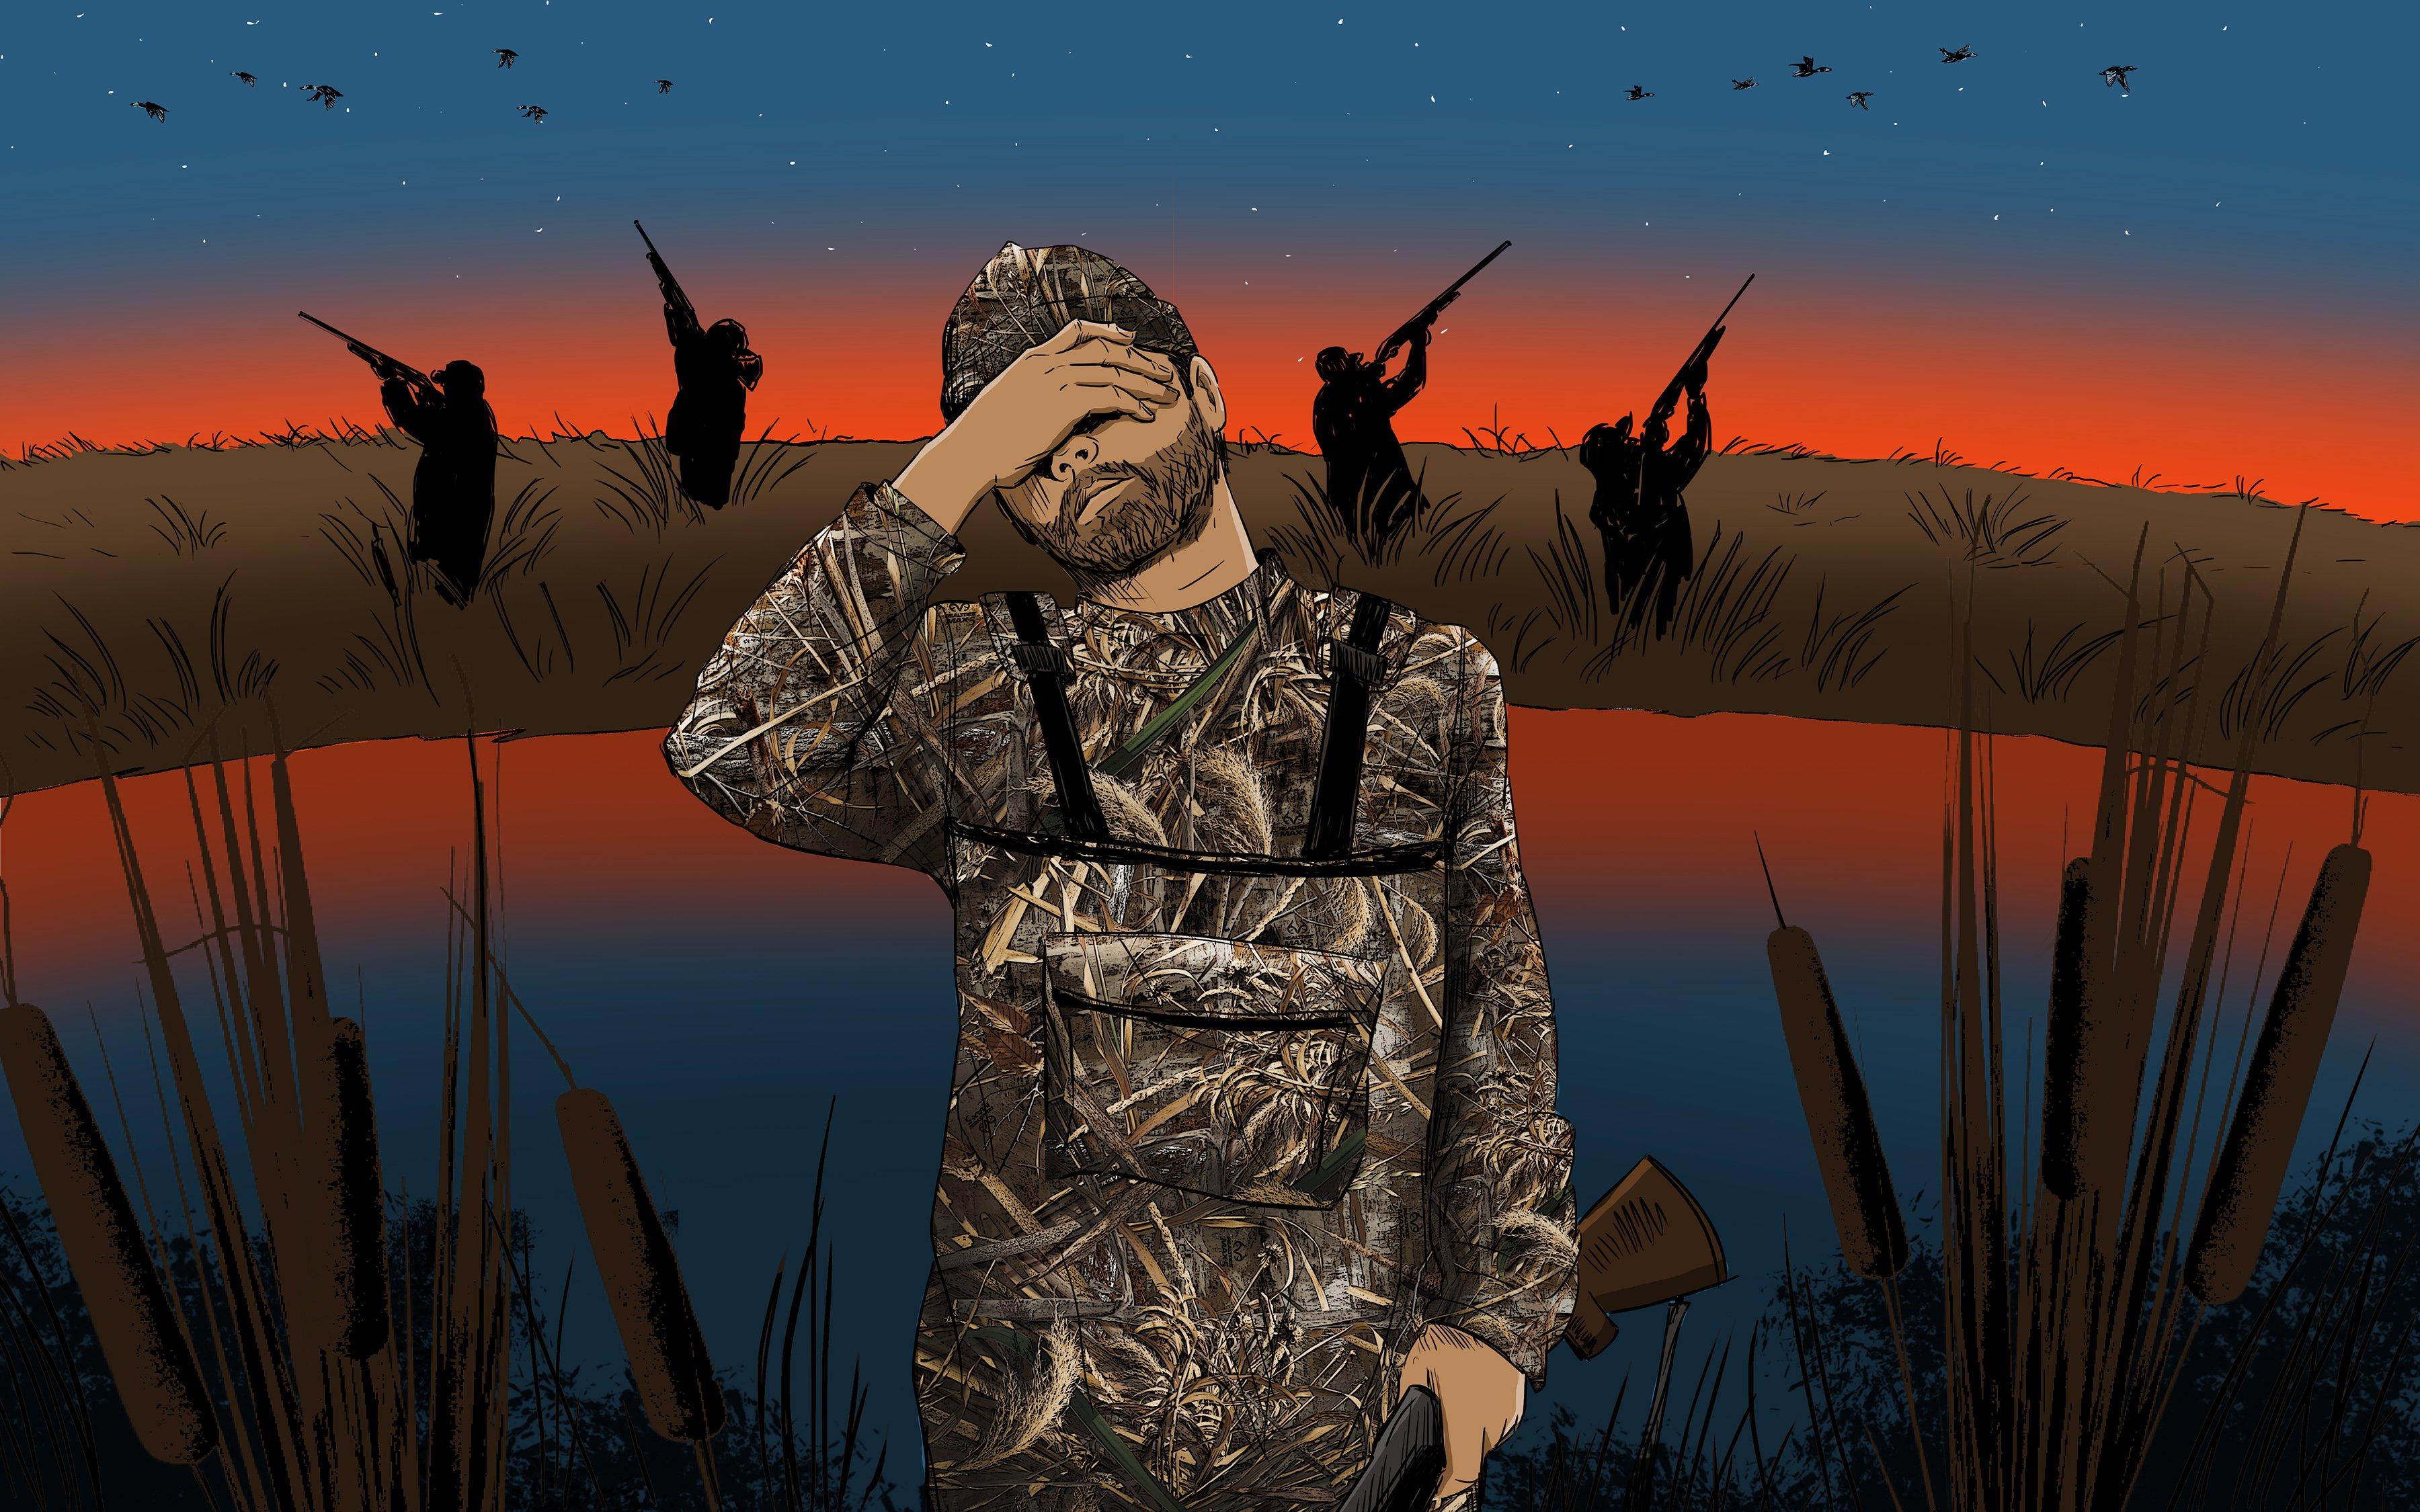 Legal shooting doesn't actually open for another 10 minutes. That and other duck hunting transgressions won't win any friends. Illustration © Ryan Orndorff